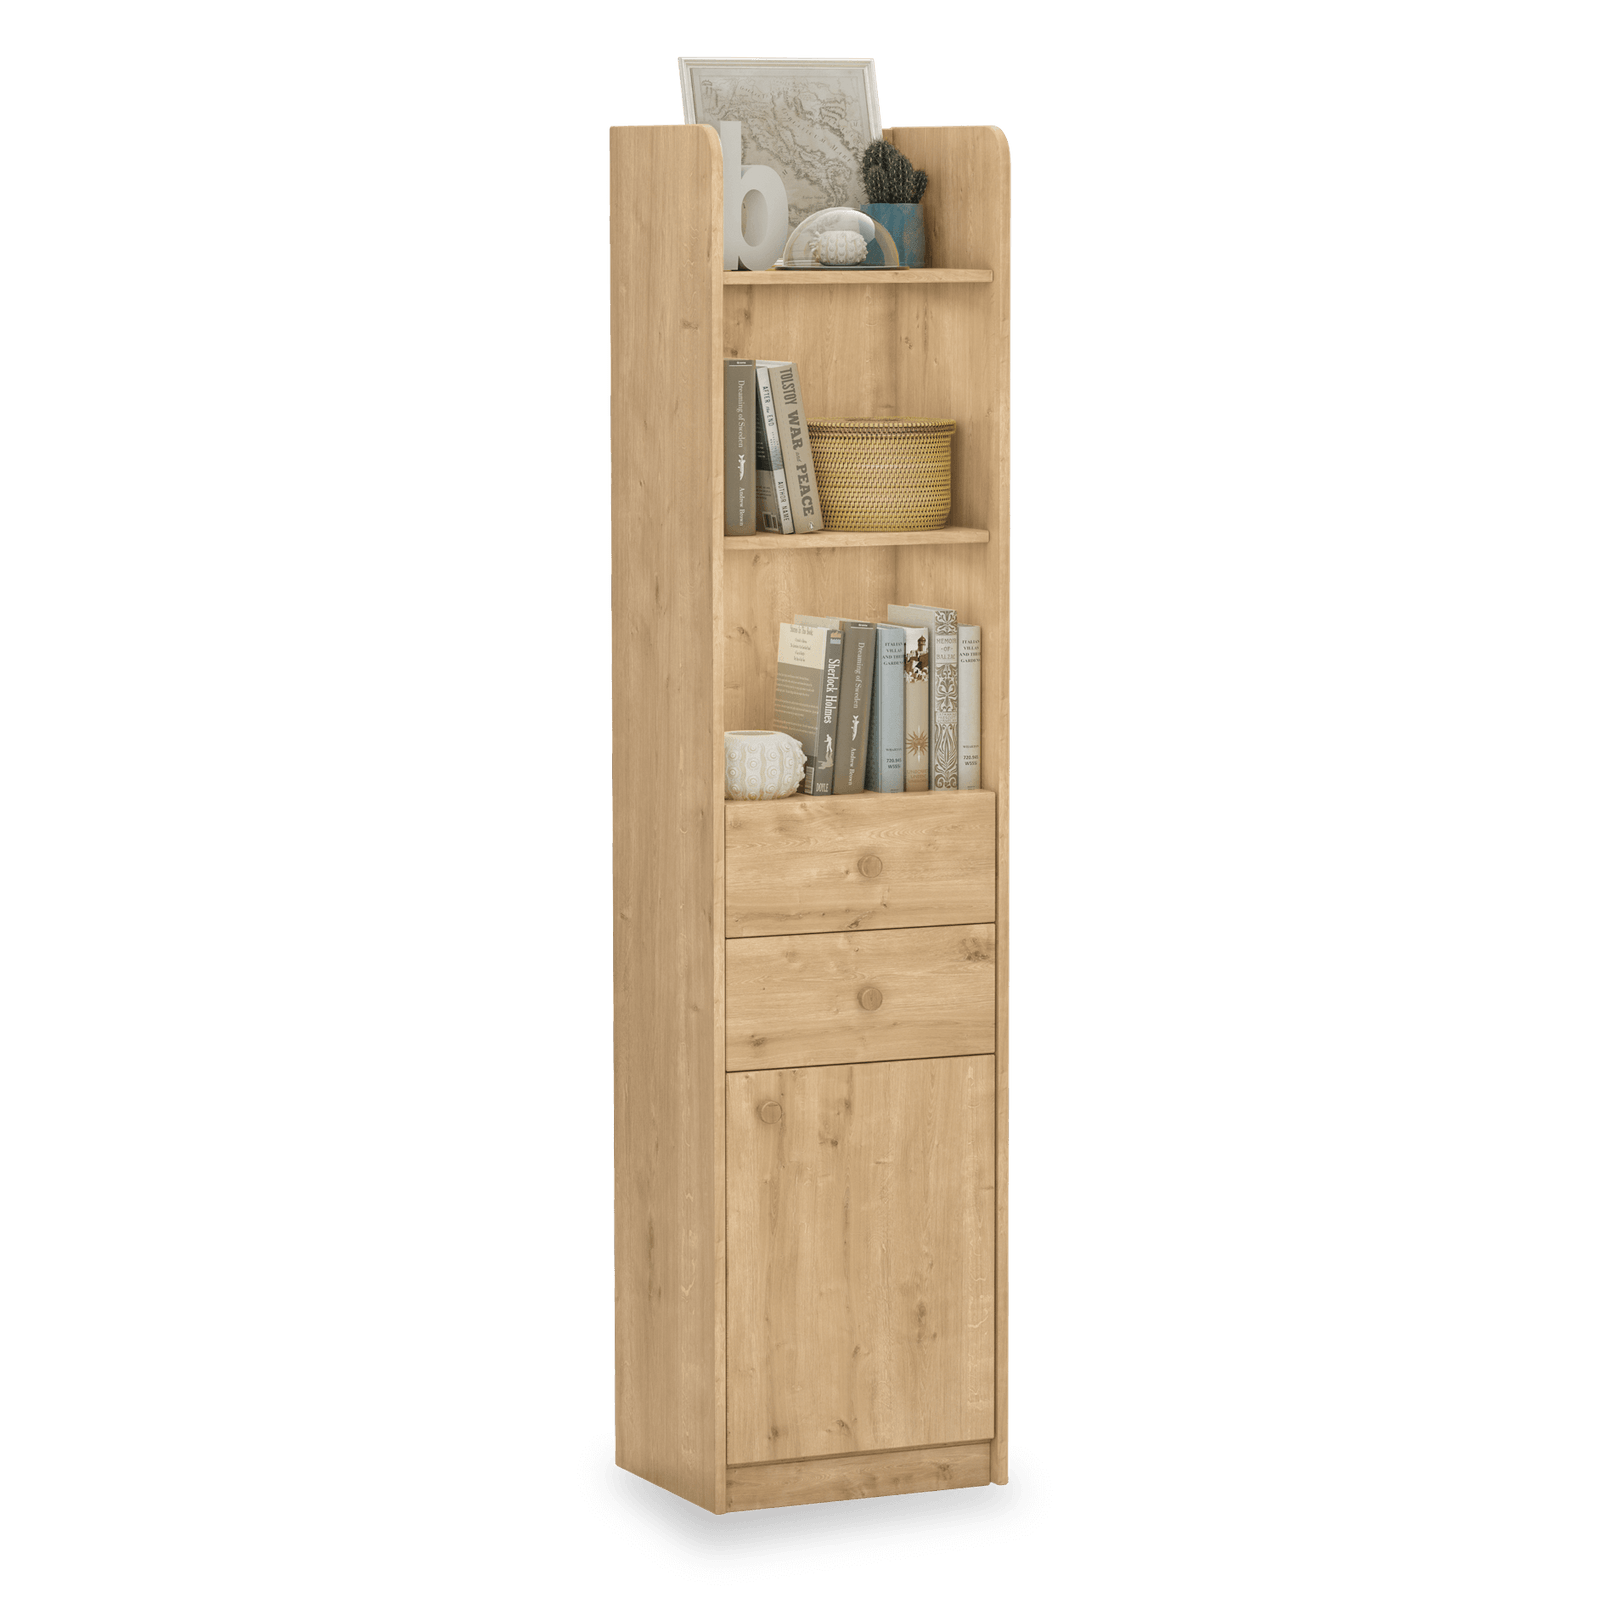 Cilek Mocha Bookcase with Drawer - Kids Haven